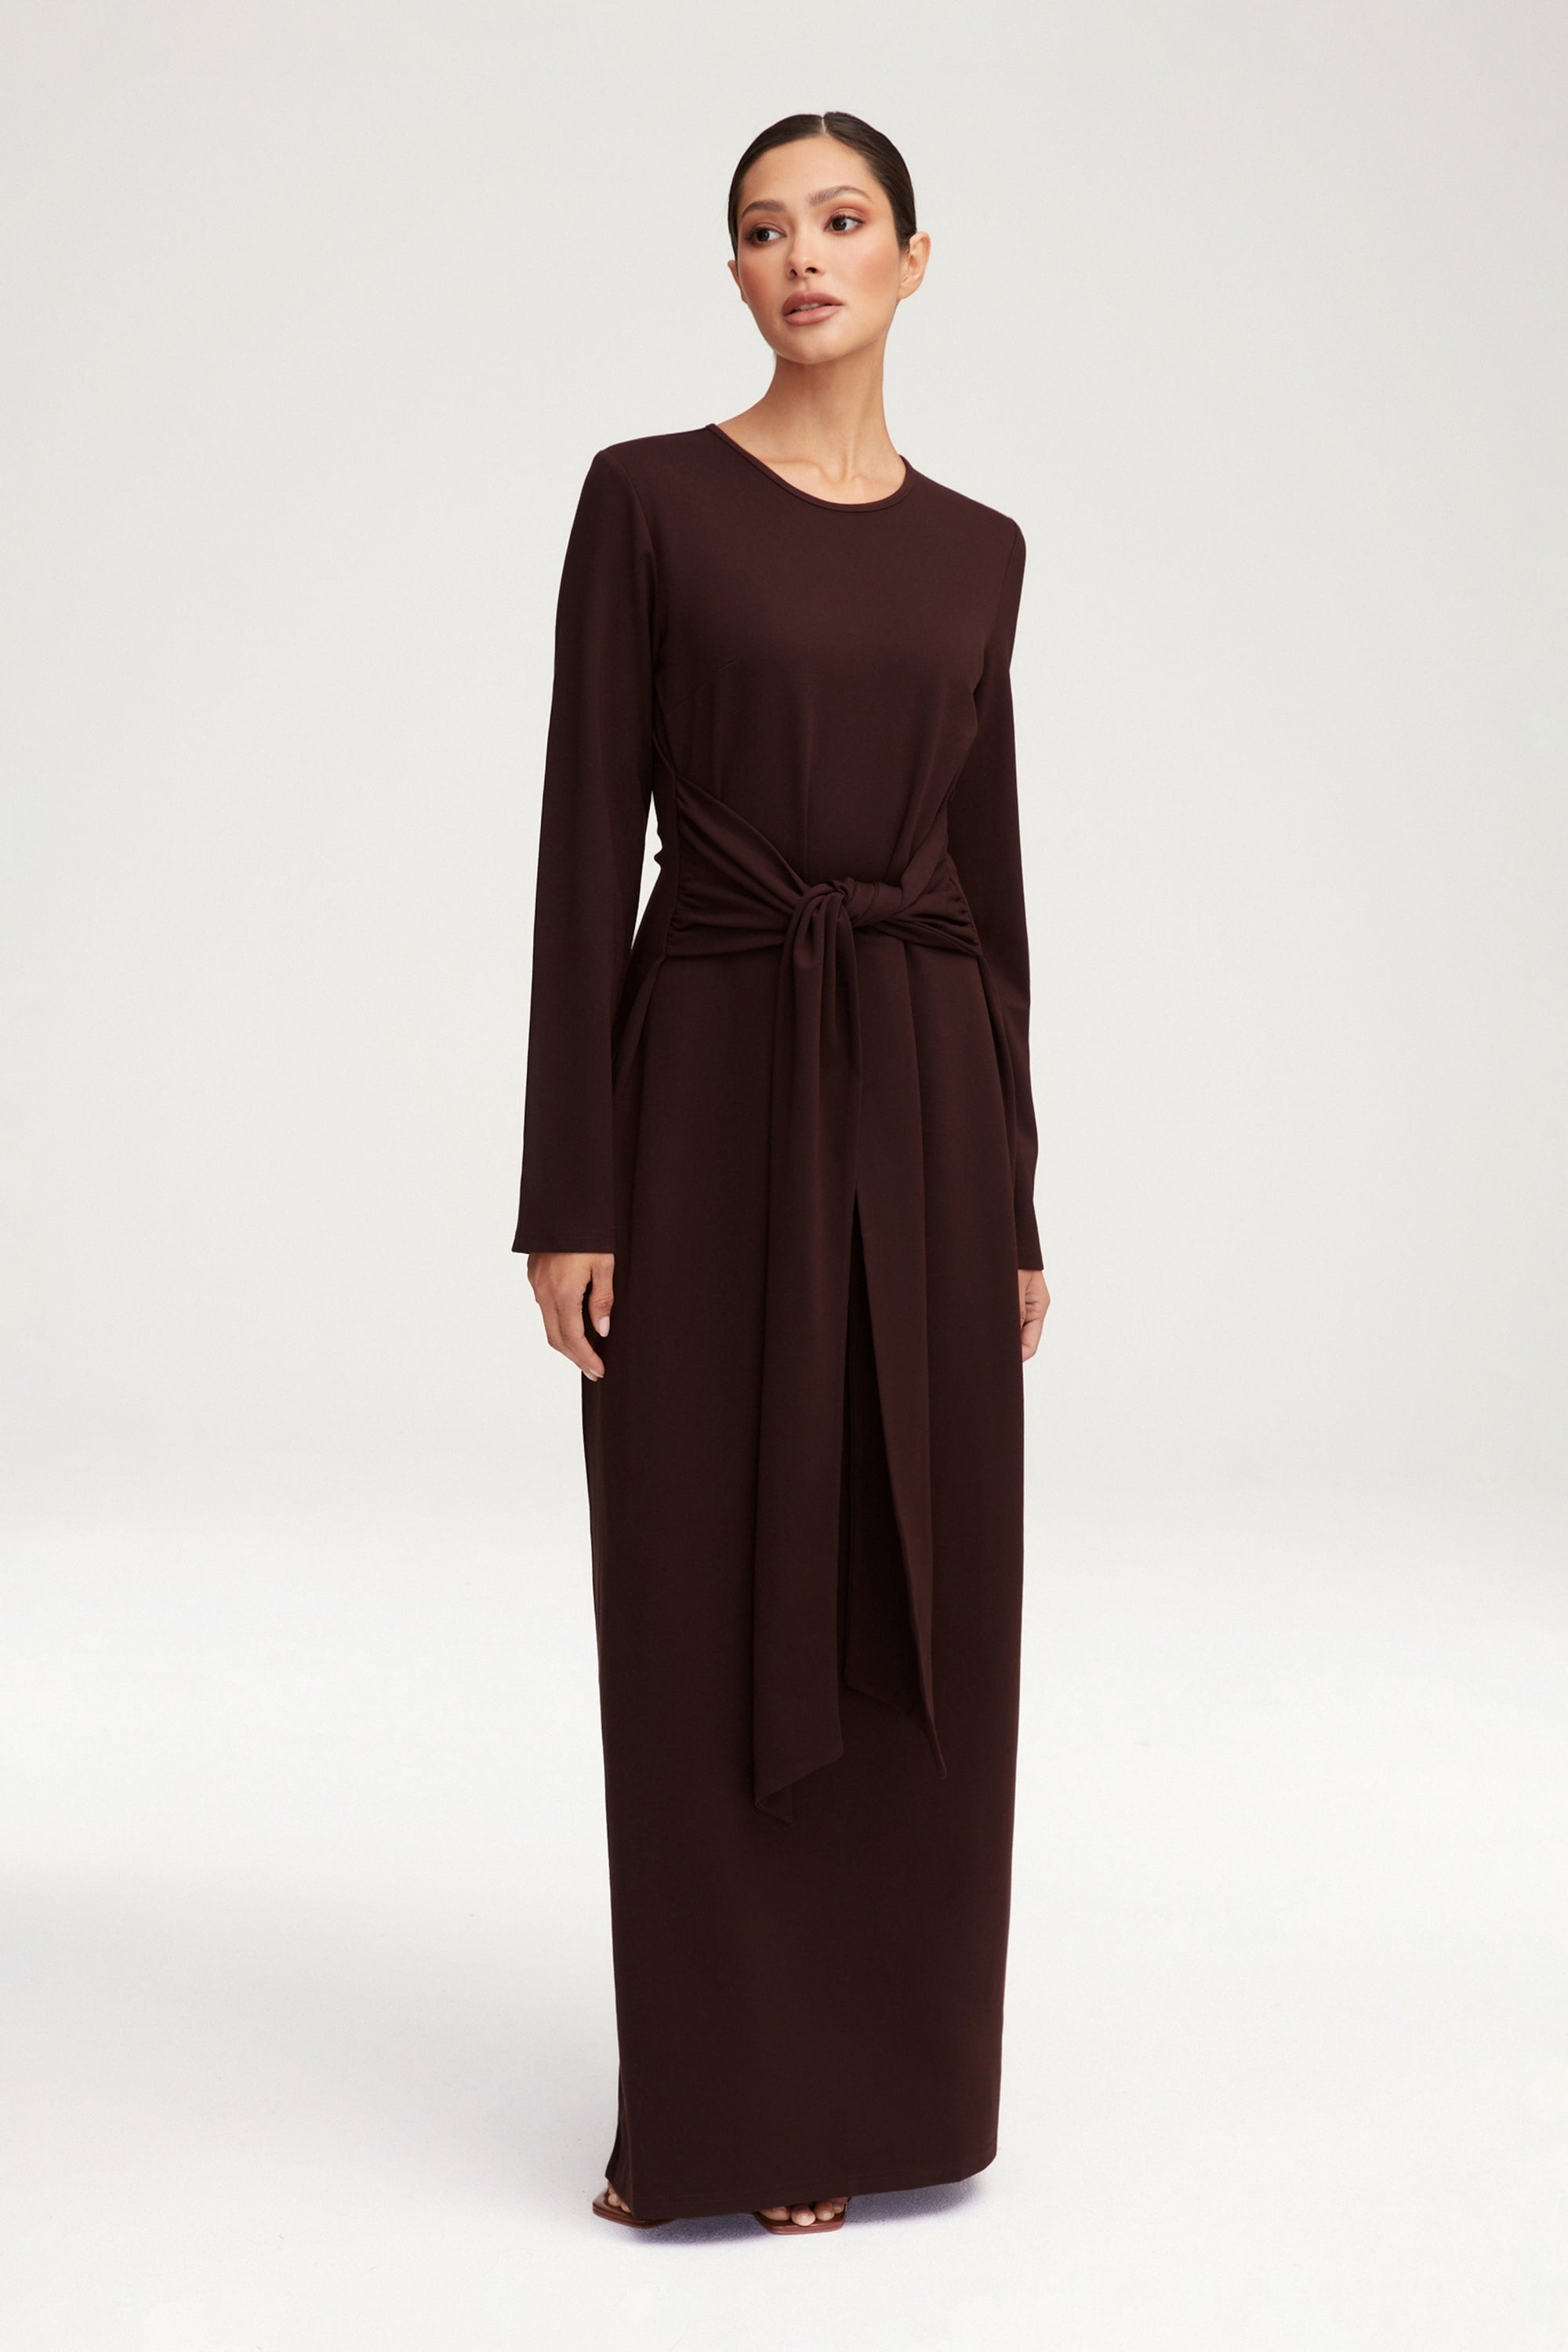 Jersey Tie Front Maxi Dress - Espresso Clothing Veiled 